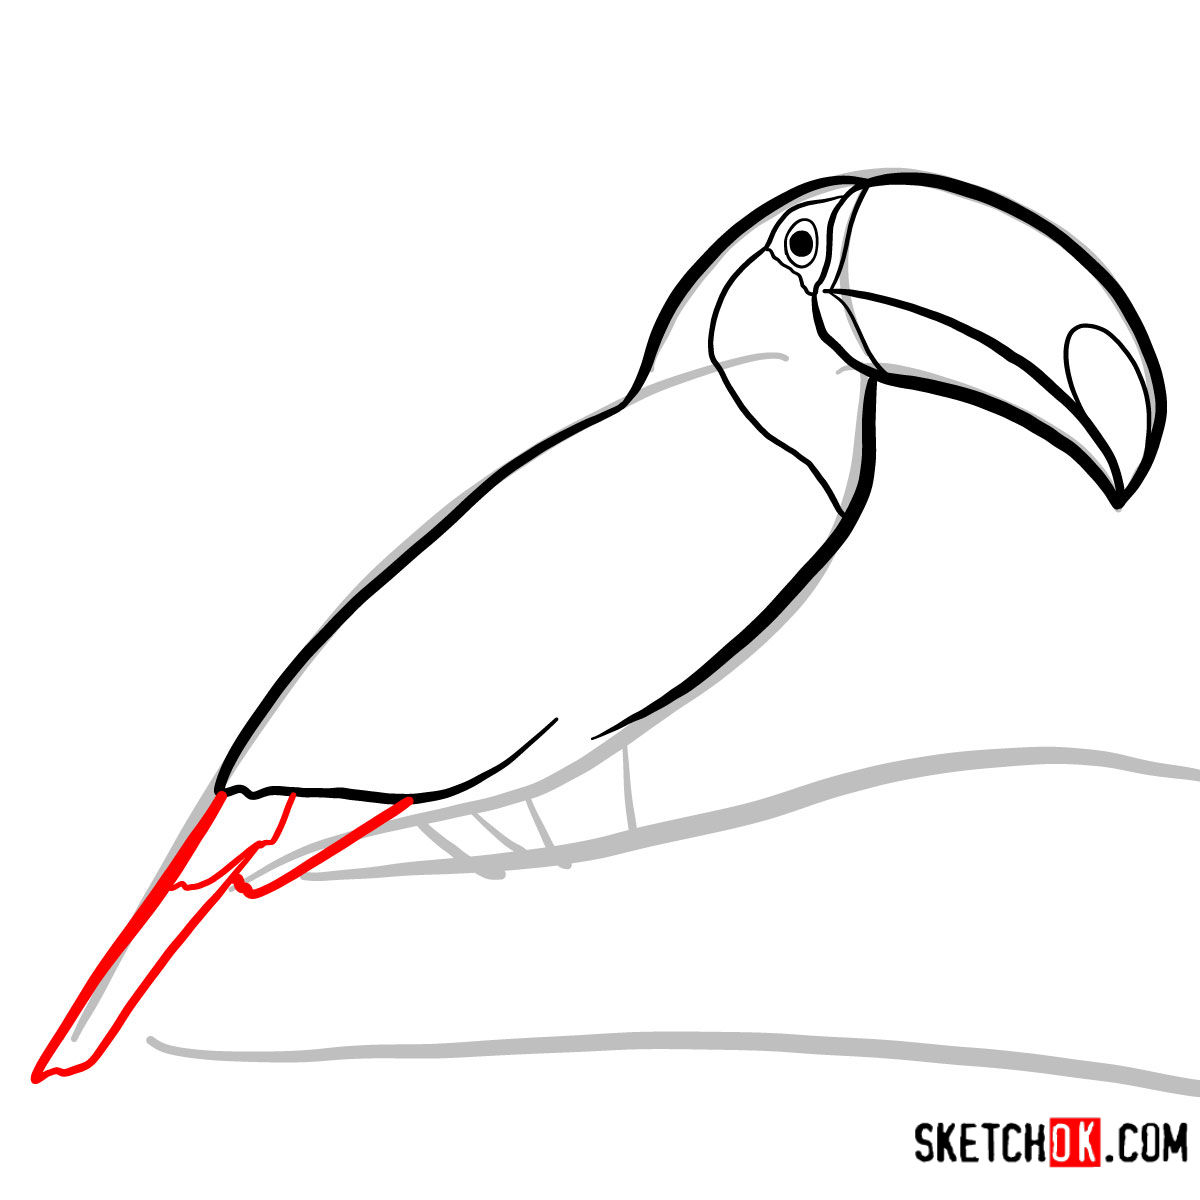 How To Draw A Toucan - Easy Step By Step Drawing Tutorial